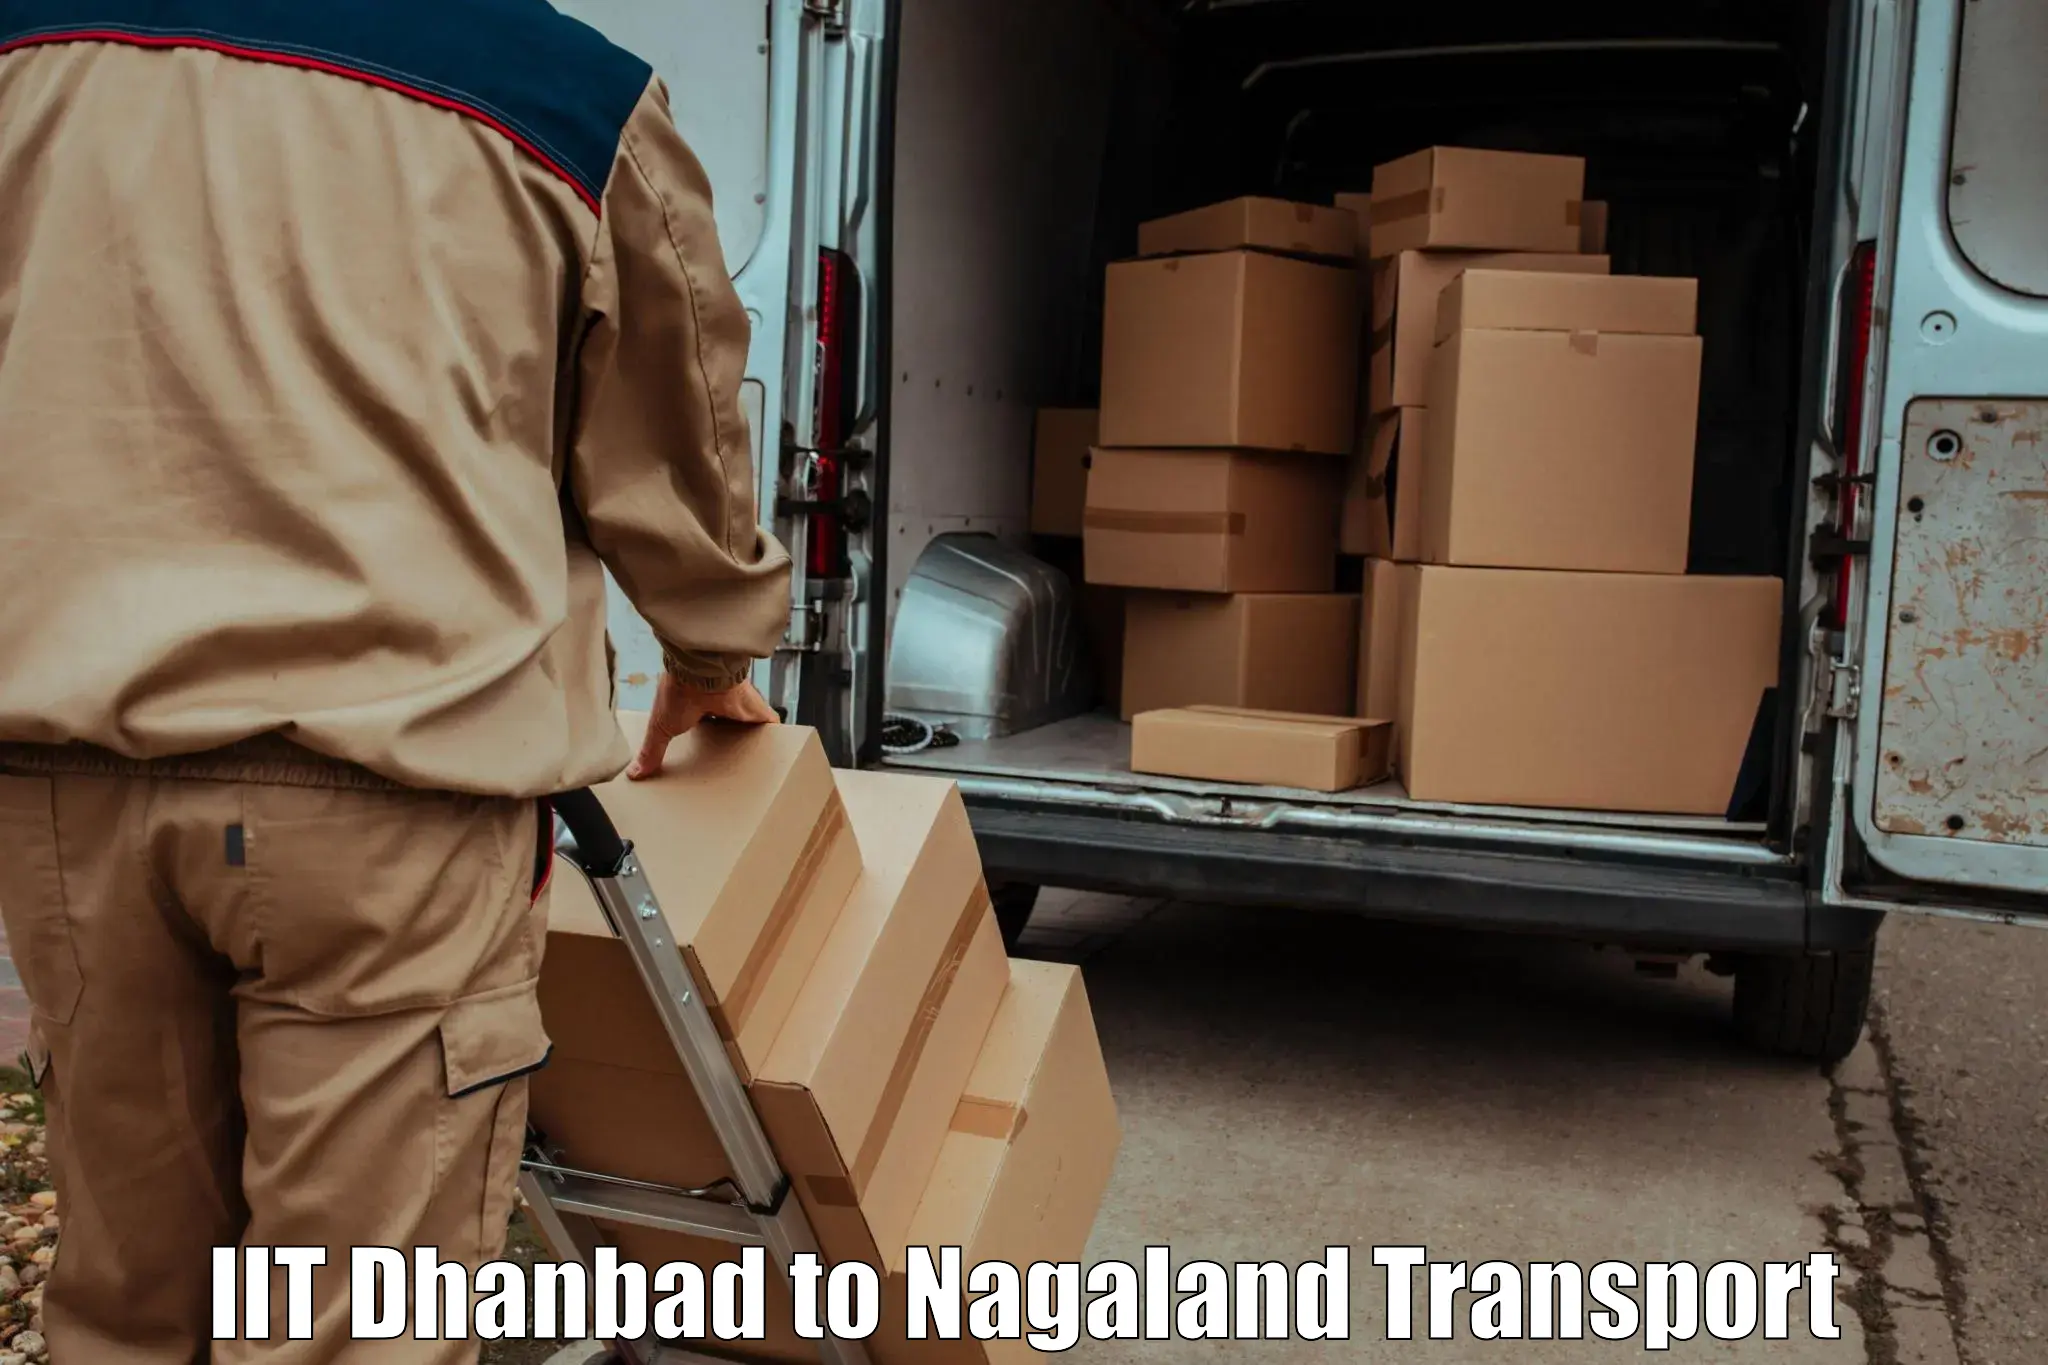 Nearby transport service IIT Dhanbad to Mokokchung